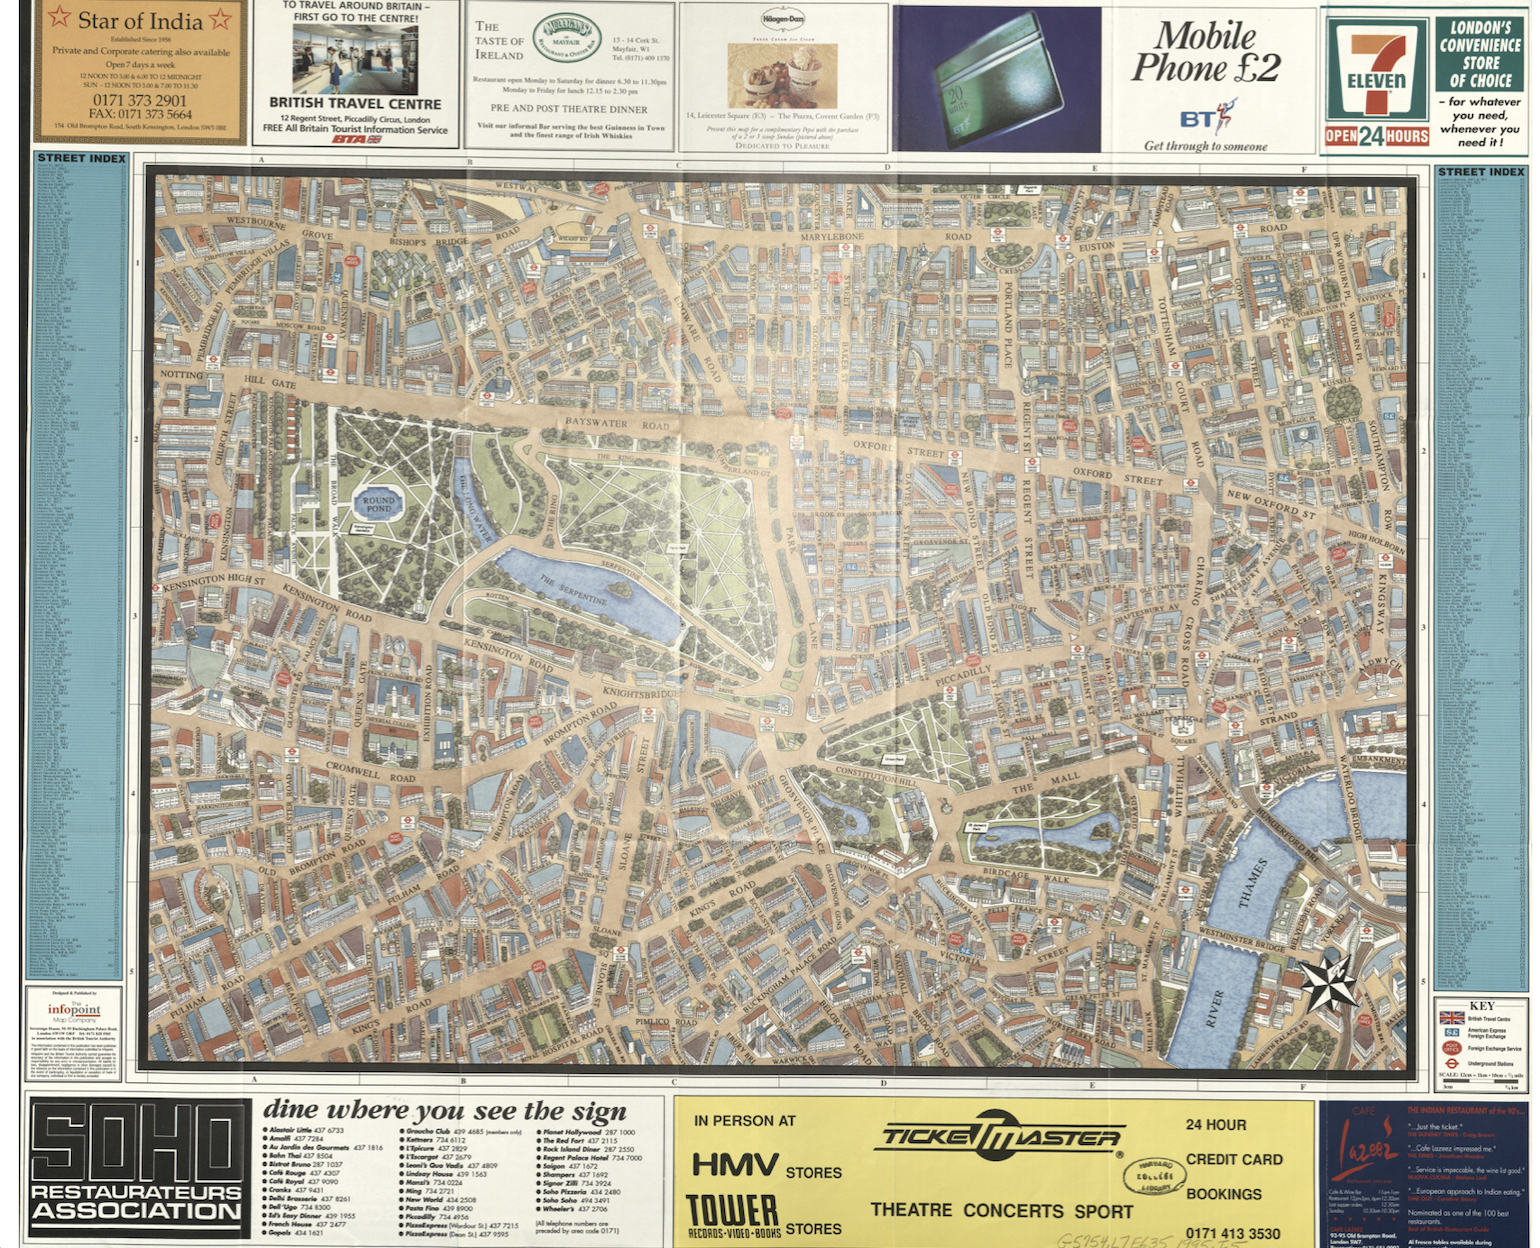 Scan of a paper map of London showing information about the restaurants